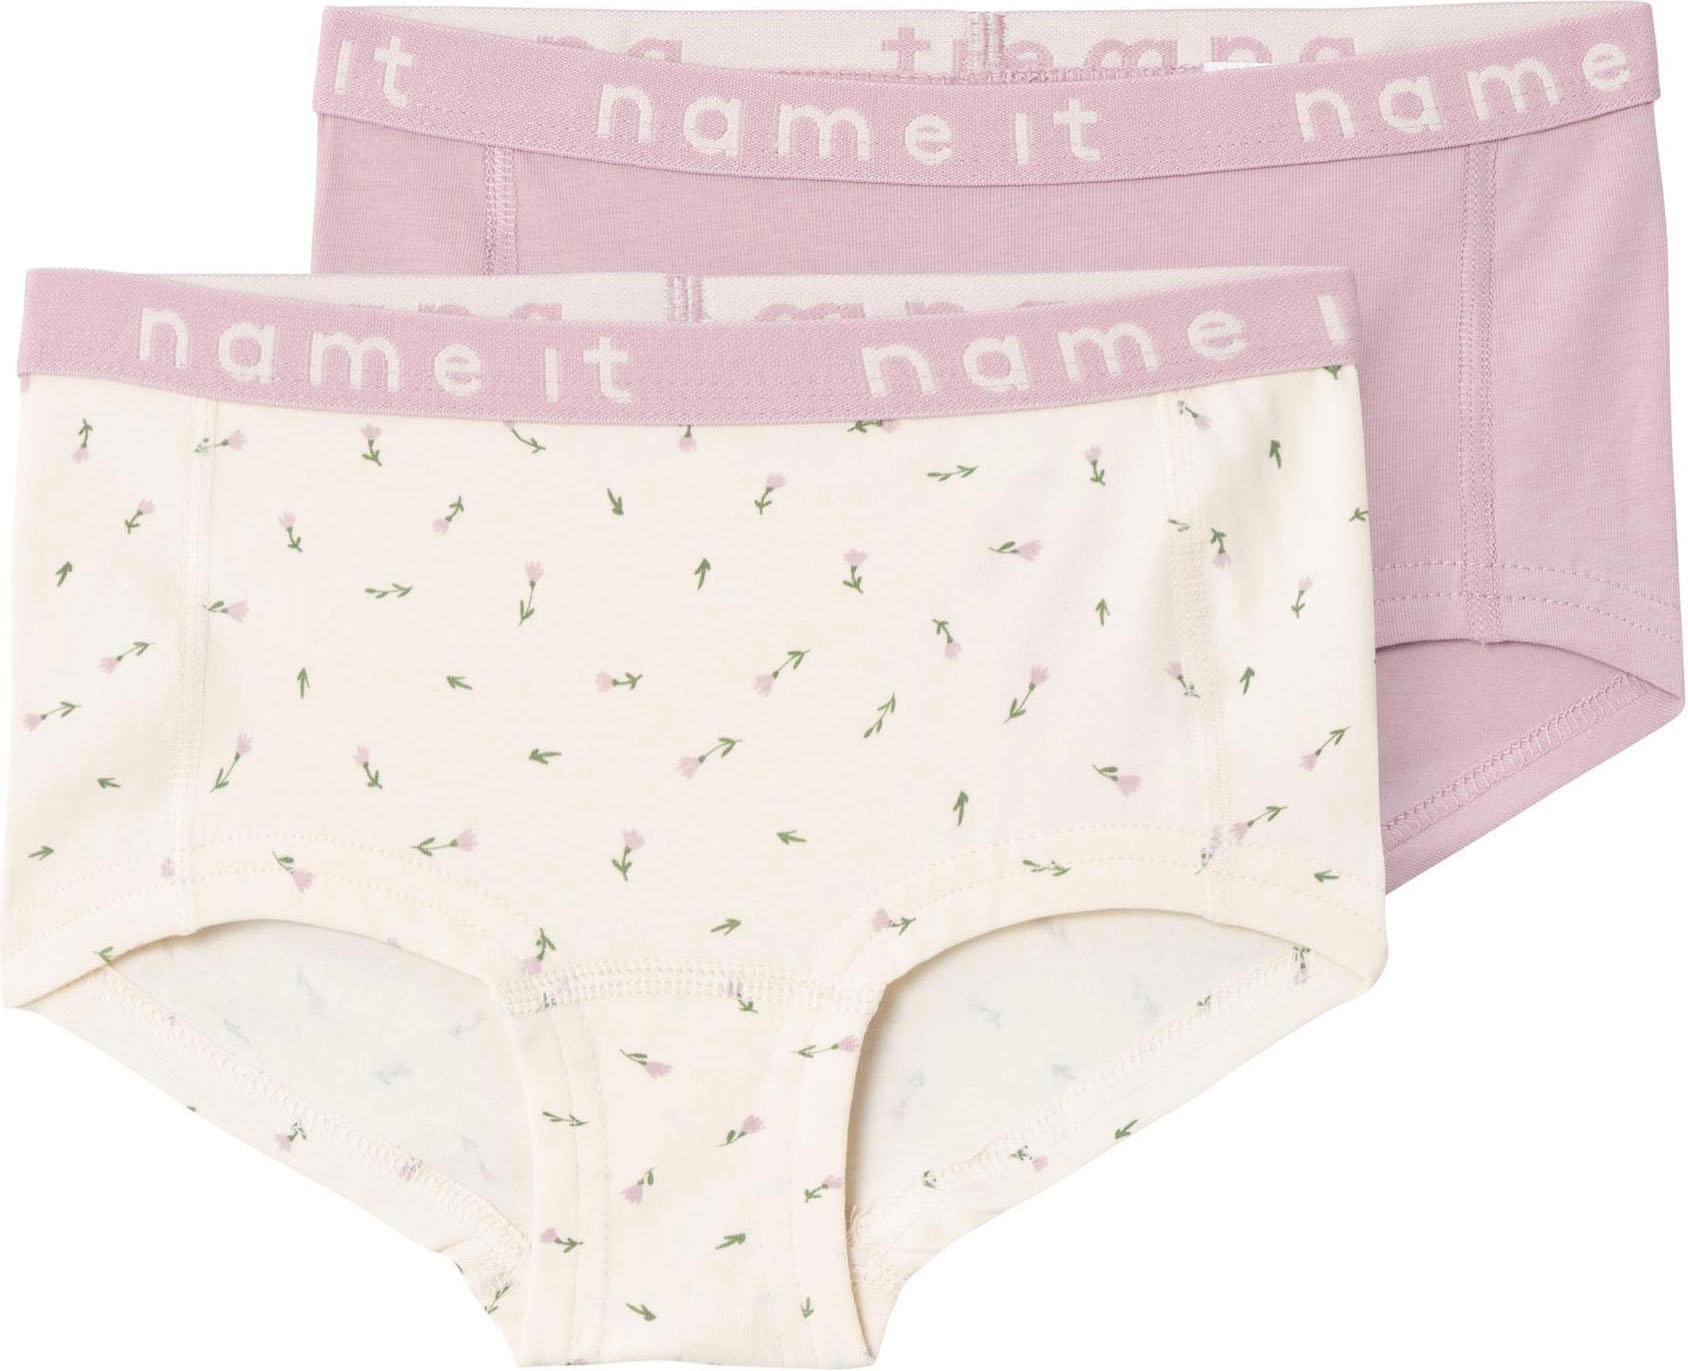 Hipster »NKFHIPSTER gleich St.) BUTTERCREAM Name FLORAL It 2P 2 (Set, NOOS«,